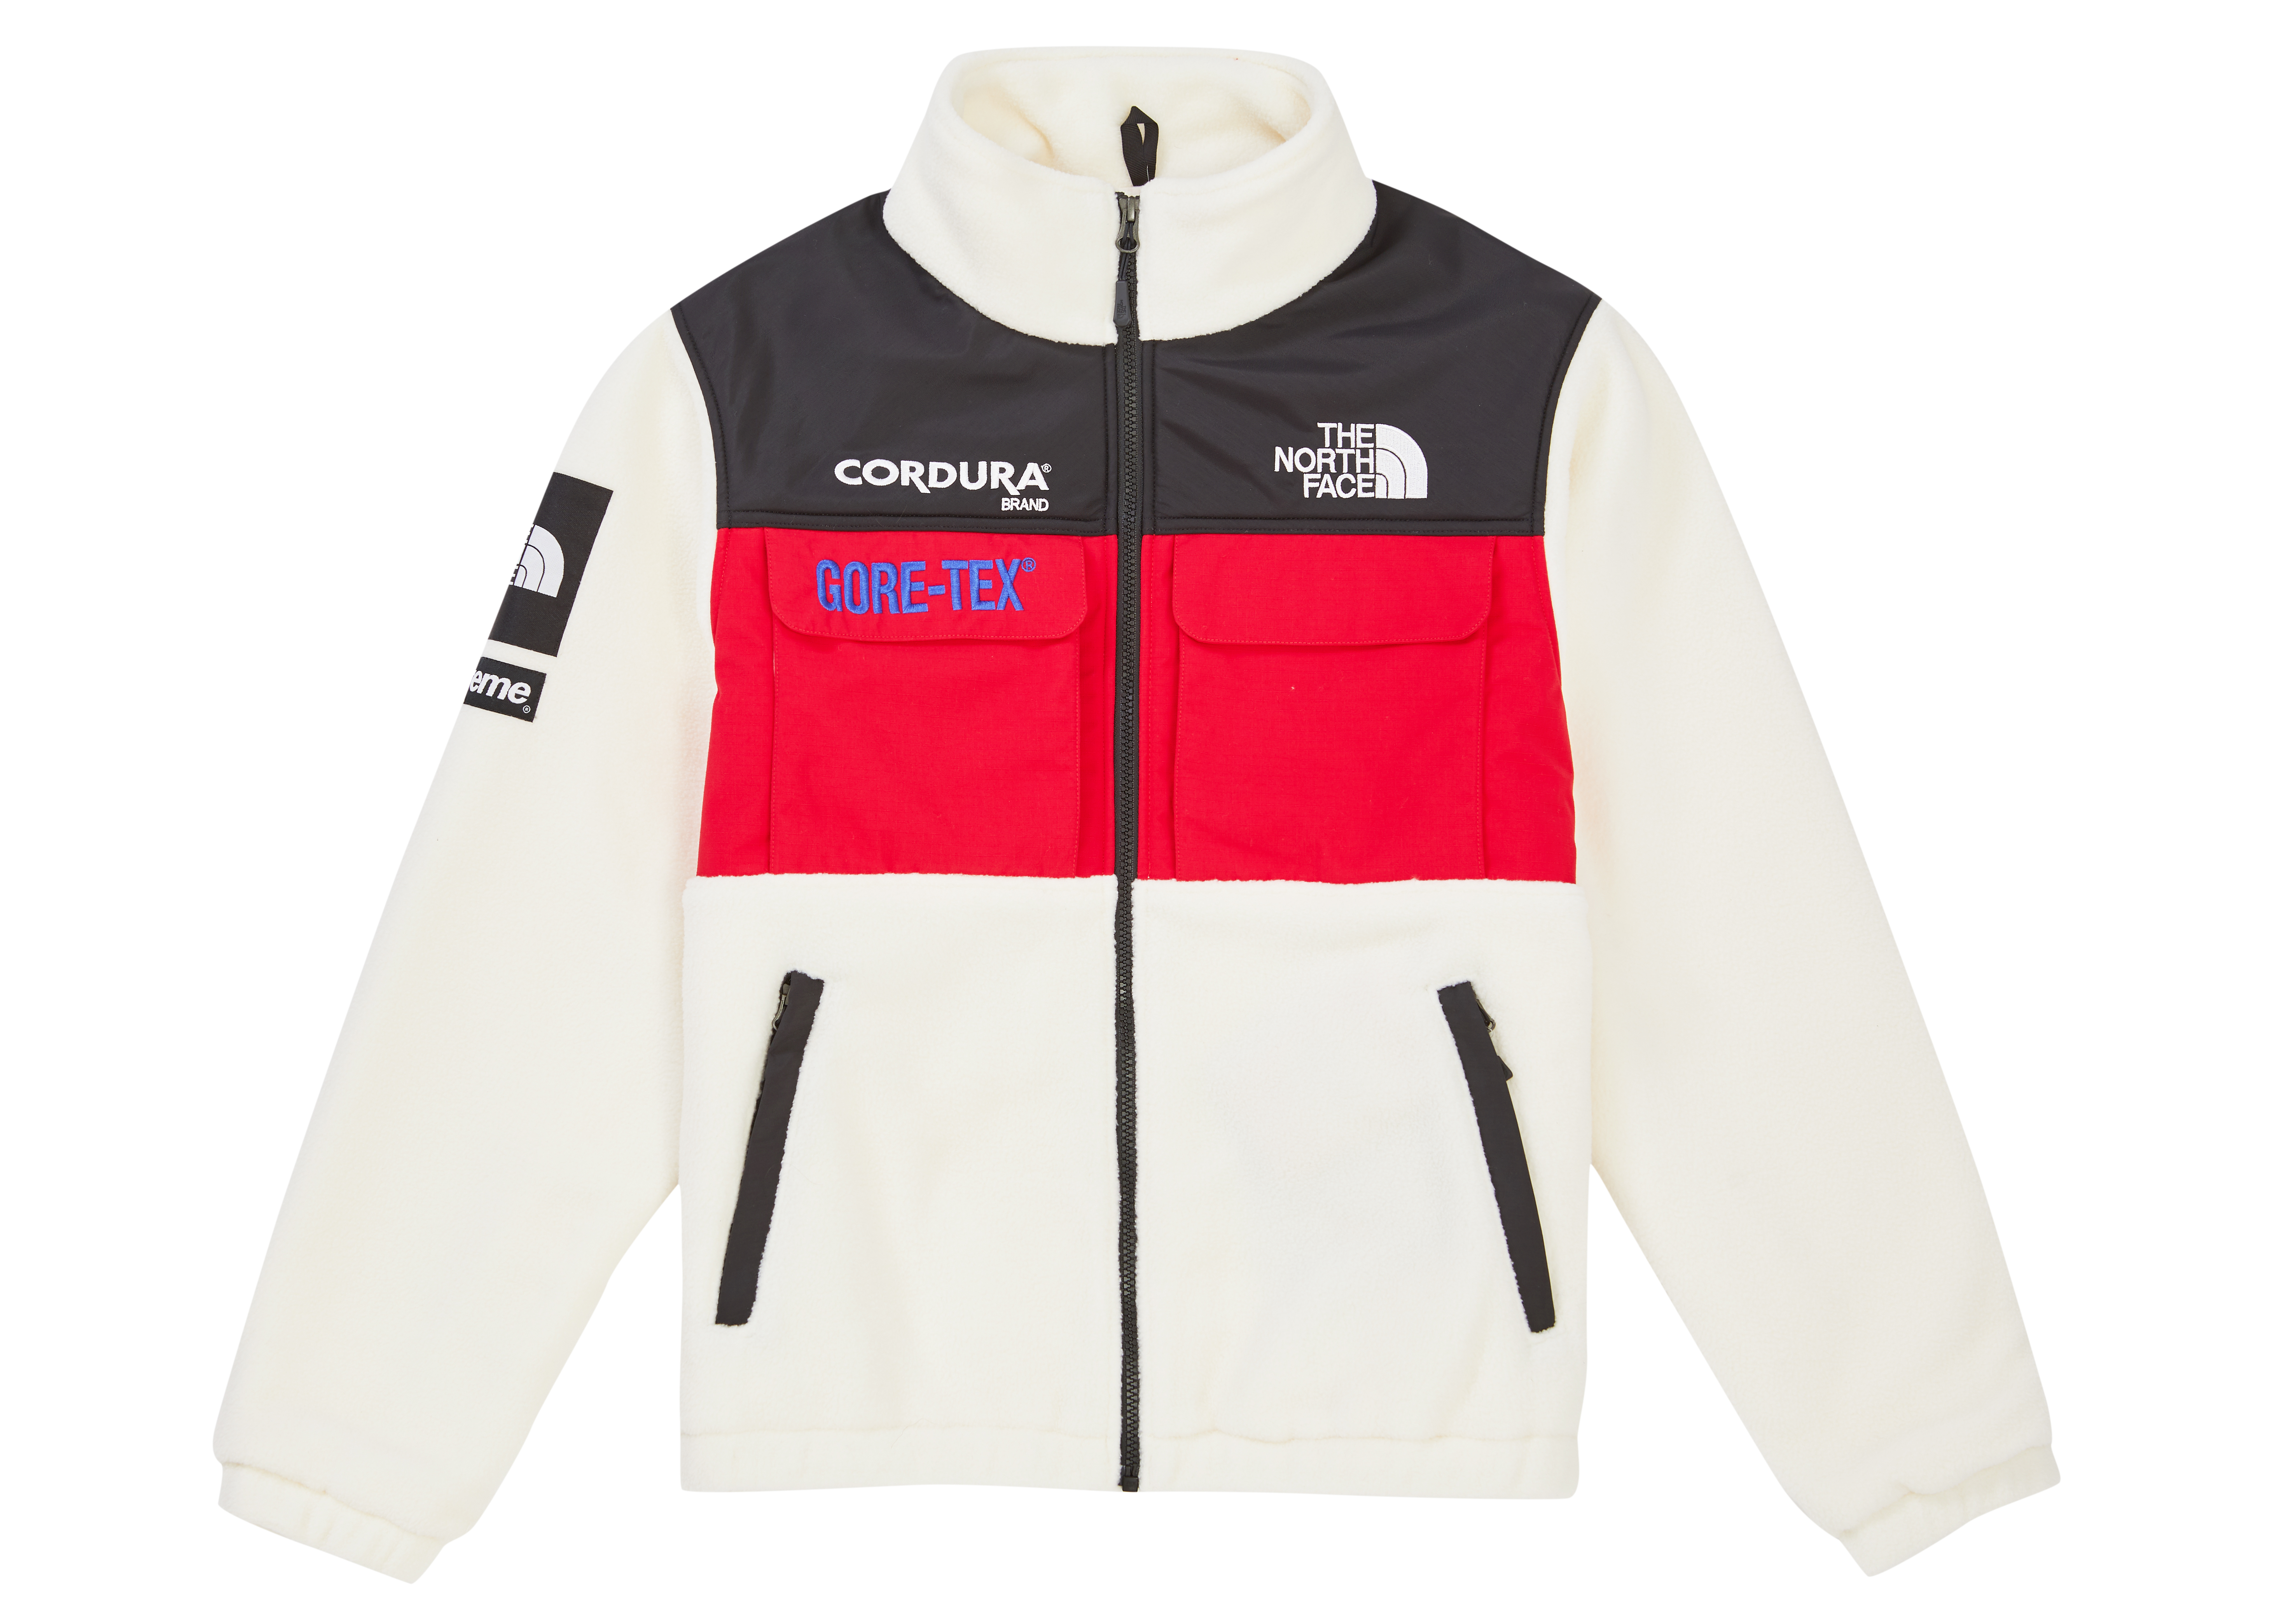 SALE爆買い Supreme - supreme/TNF Expedition Fleece Jacketの通販 by